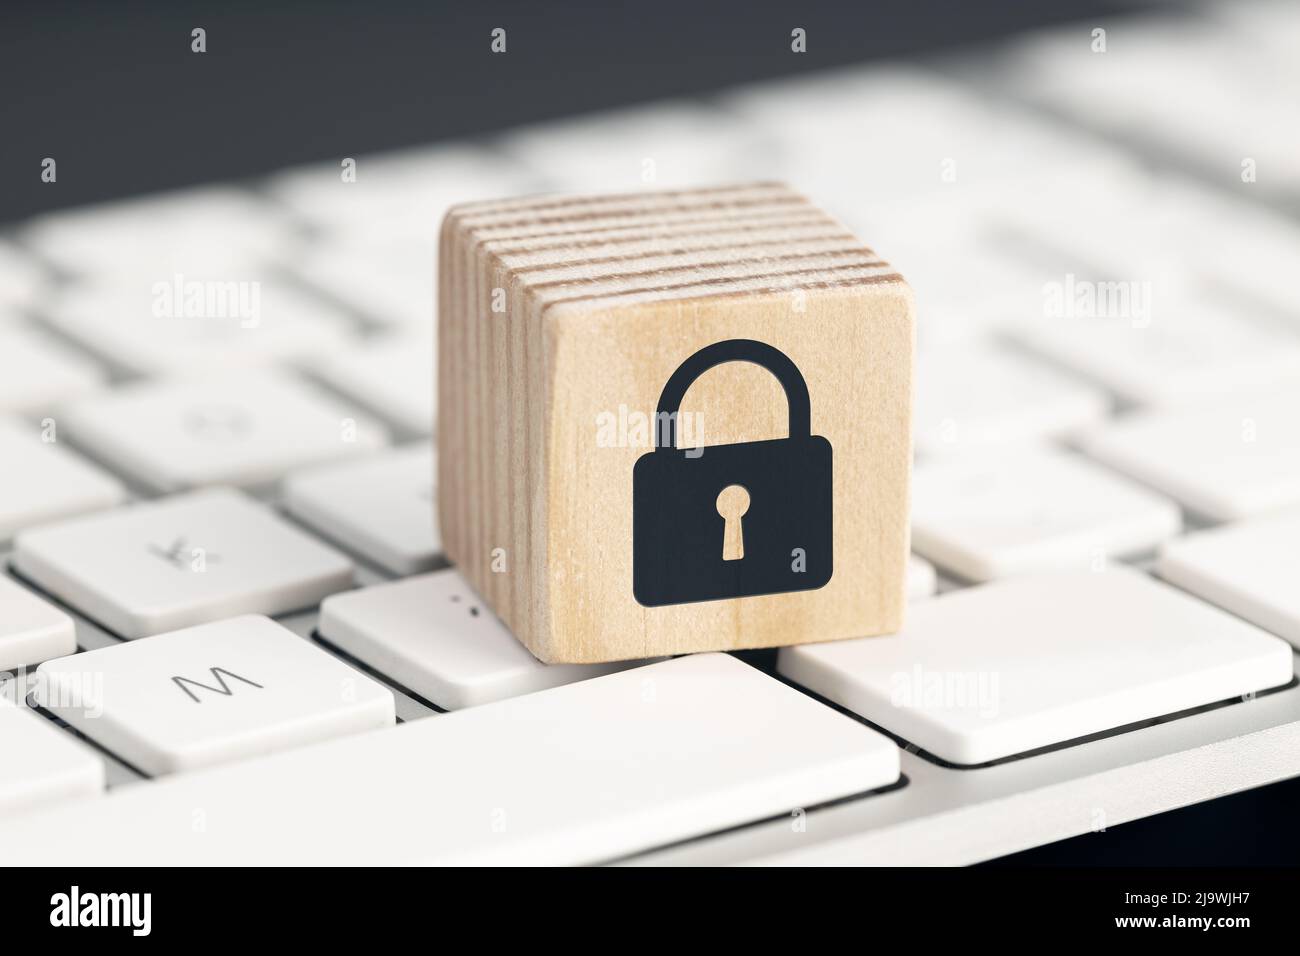 Computer Security protection concept. Cyber attack protection. Closed padlock icon on wooden block on computer keyboard Stock Photo